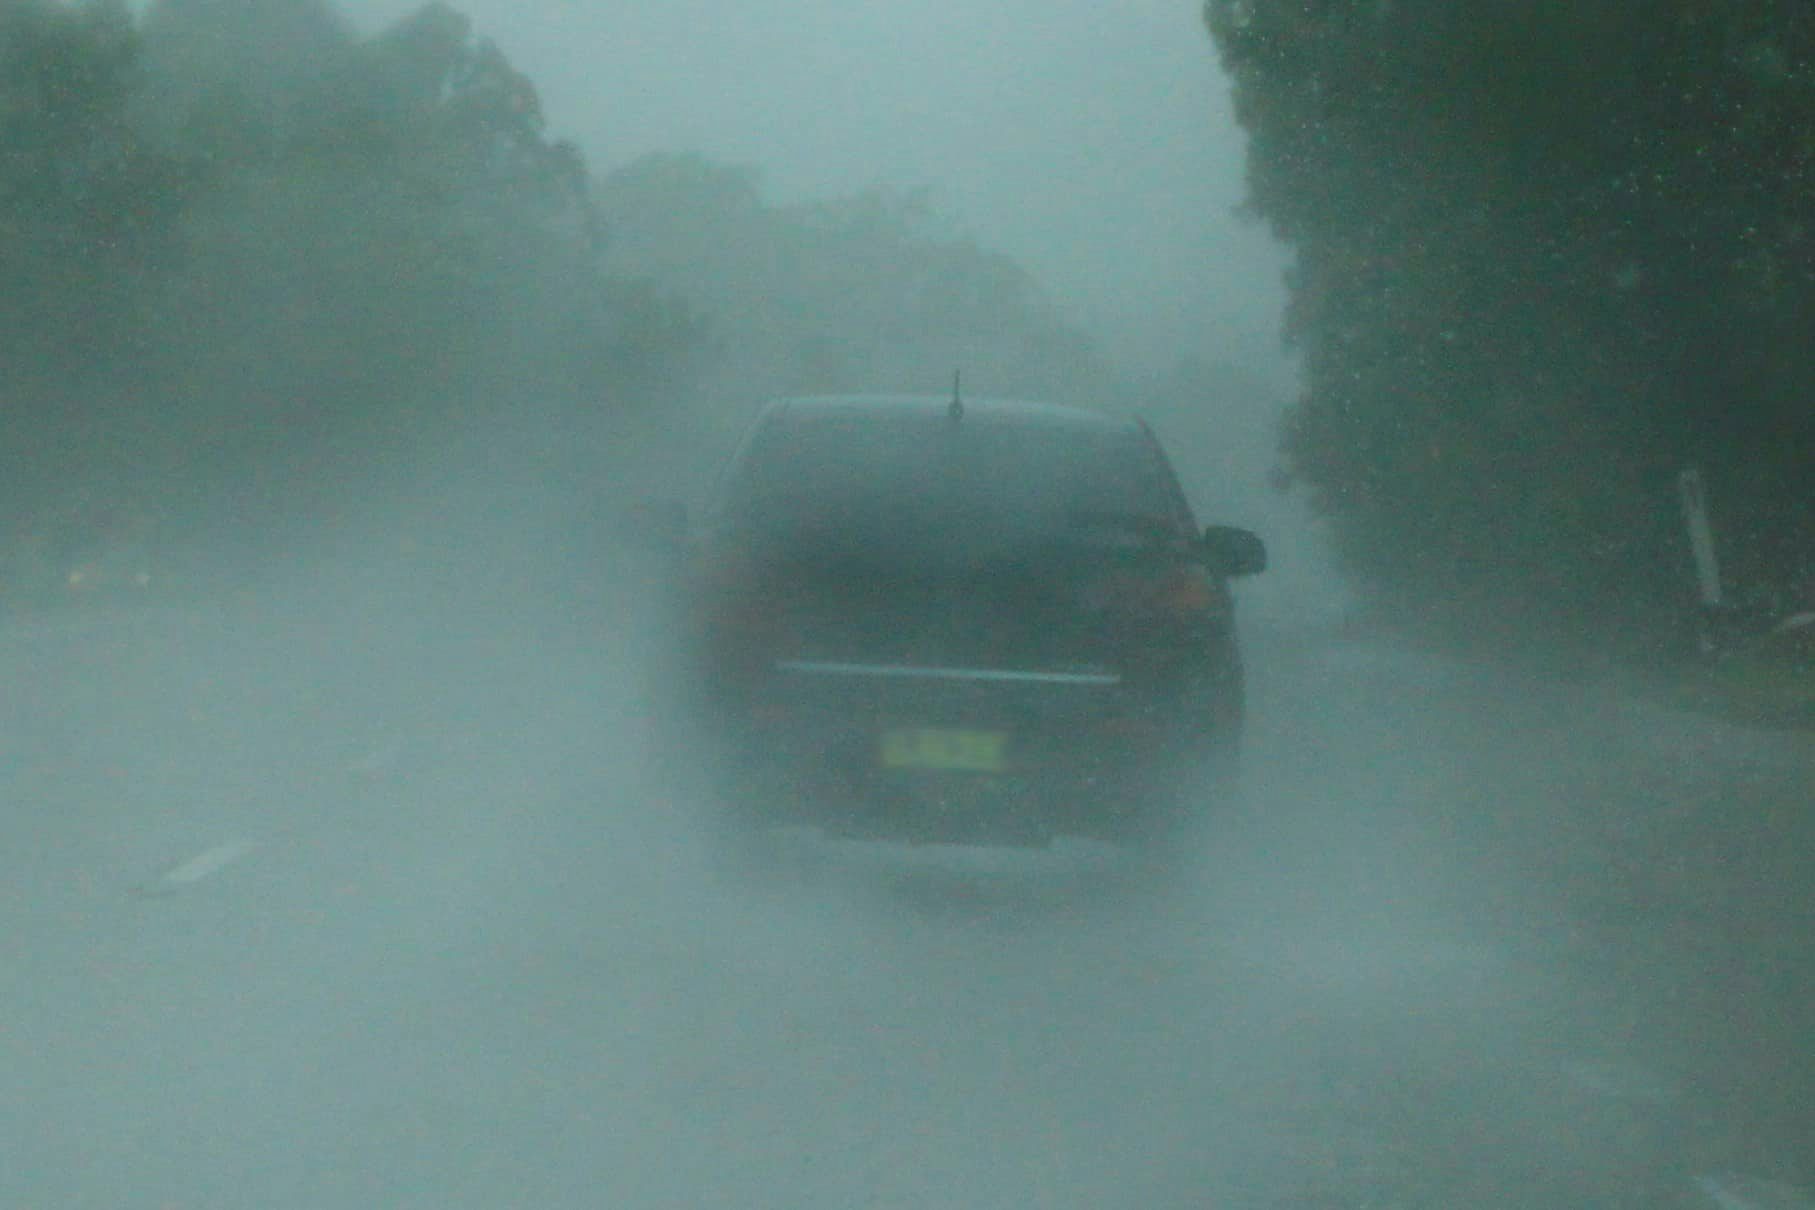 Car driving on road with heavy rain